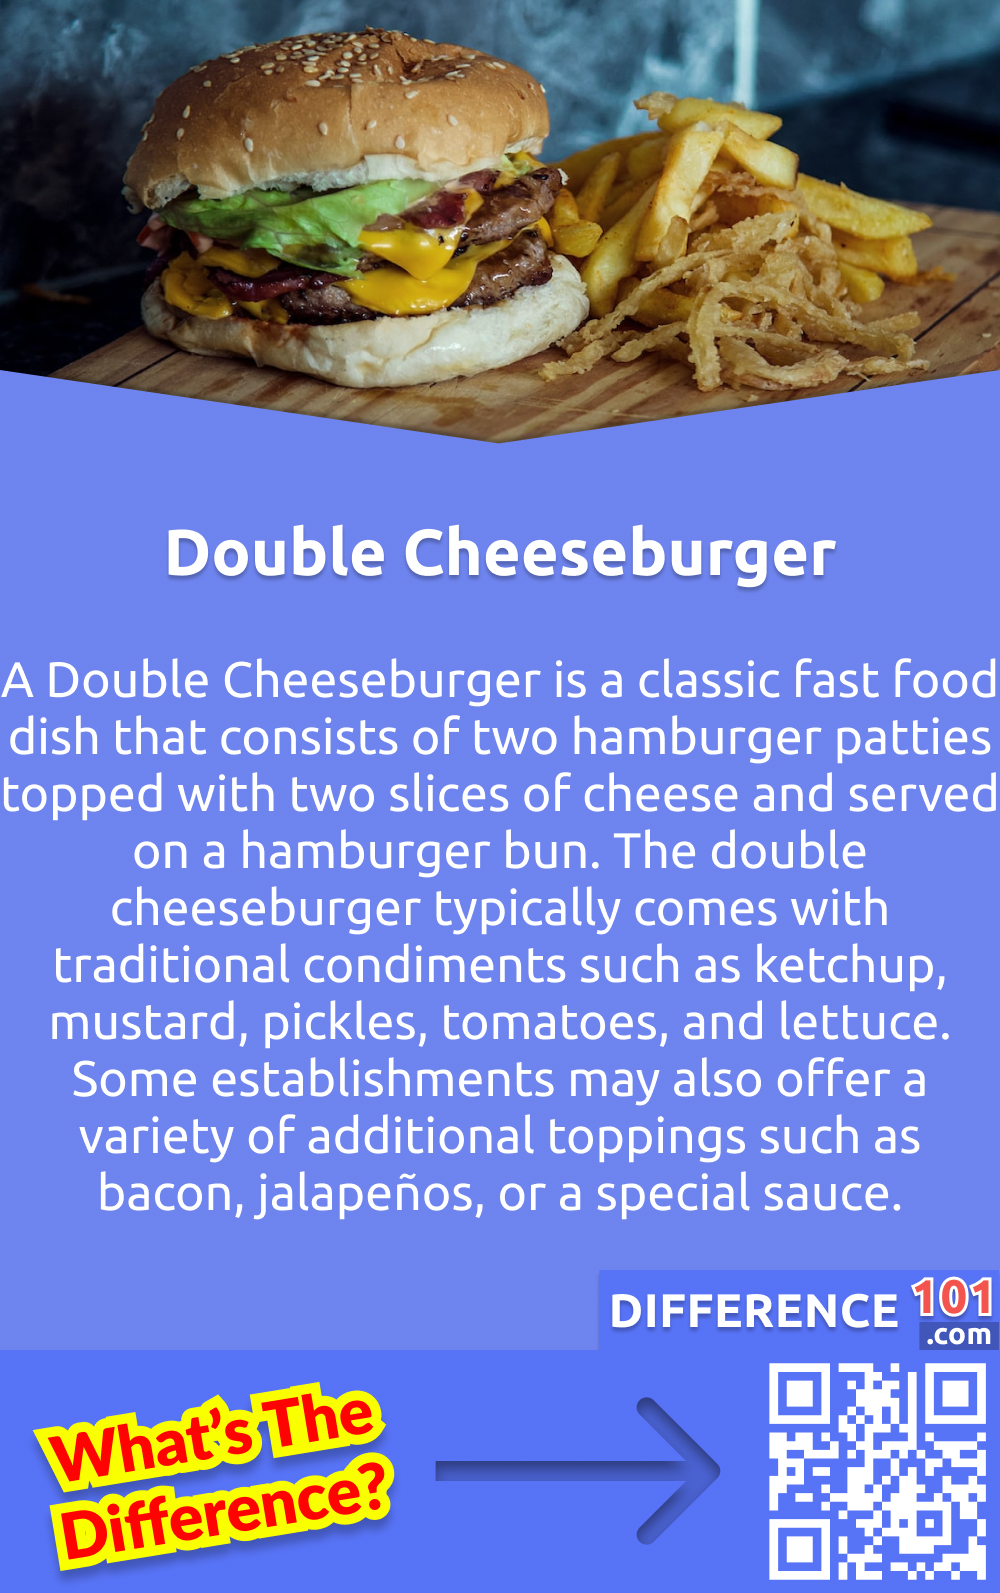 What Is Double Cheeseburger? A double cheeseburger is a classic fast food dish that consists of two hamburger patties topped with two slices of cheese and served on a hamburger bun. It is a popular choice for burger lovers who want more than the classic single patty cheeseburger. The double cheeseburger typically comes with traditional condiments such as ketchup, mustard, pickles, tomatoes, and lettuce. Some establishments may also offer a variety of additional toppings such as bacon, jalapeños, or a special sauce. The double cheeseburger can be ordered as a meal with a side of fries, onion rings, or a salad. Whether you're looking for a quick lunch or a hearty dinner, the double cheeseburger is sure to satisfy.